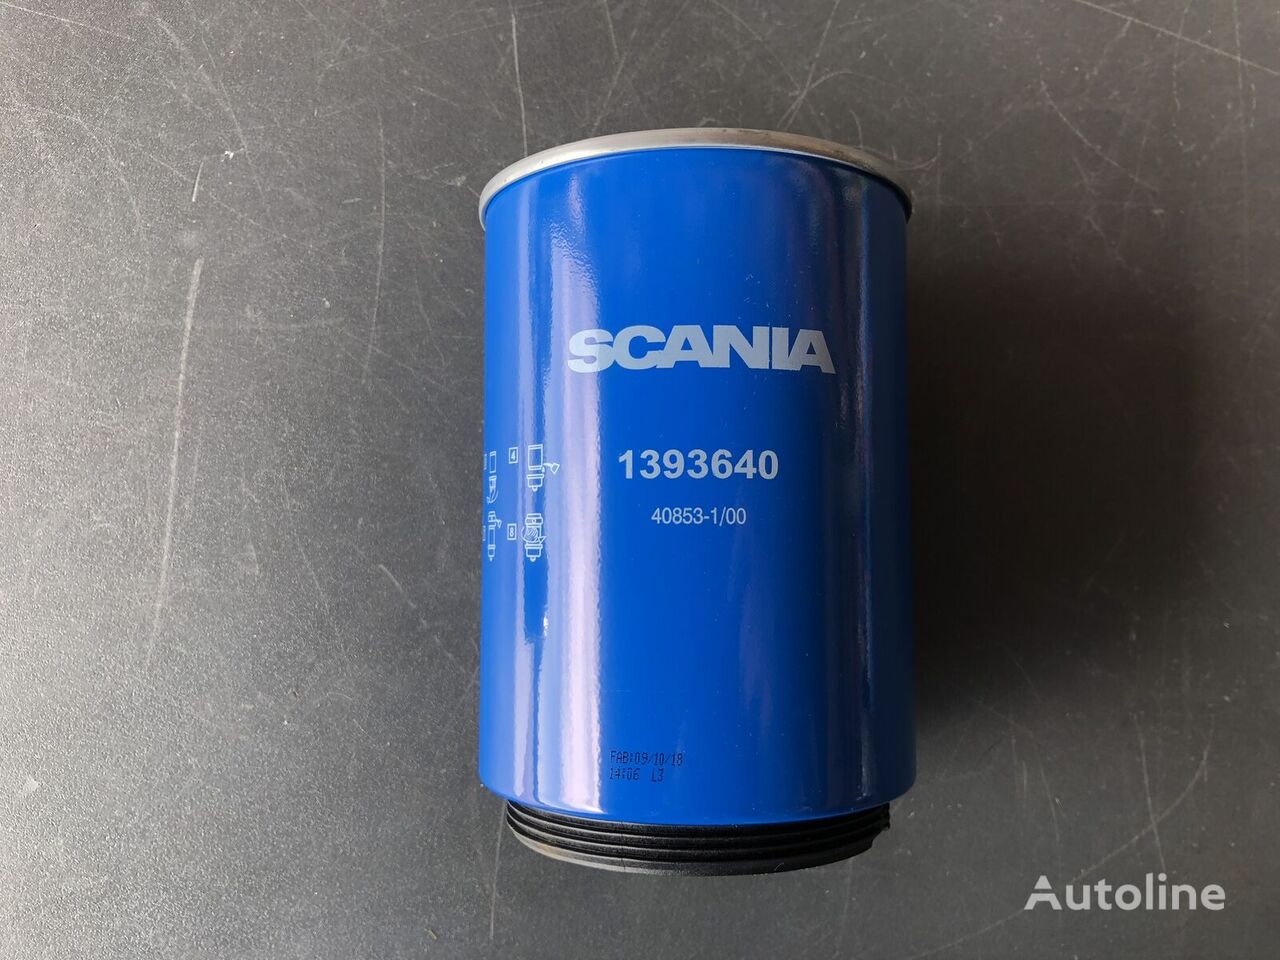 Scania 1393640 fuel filter for truck